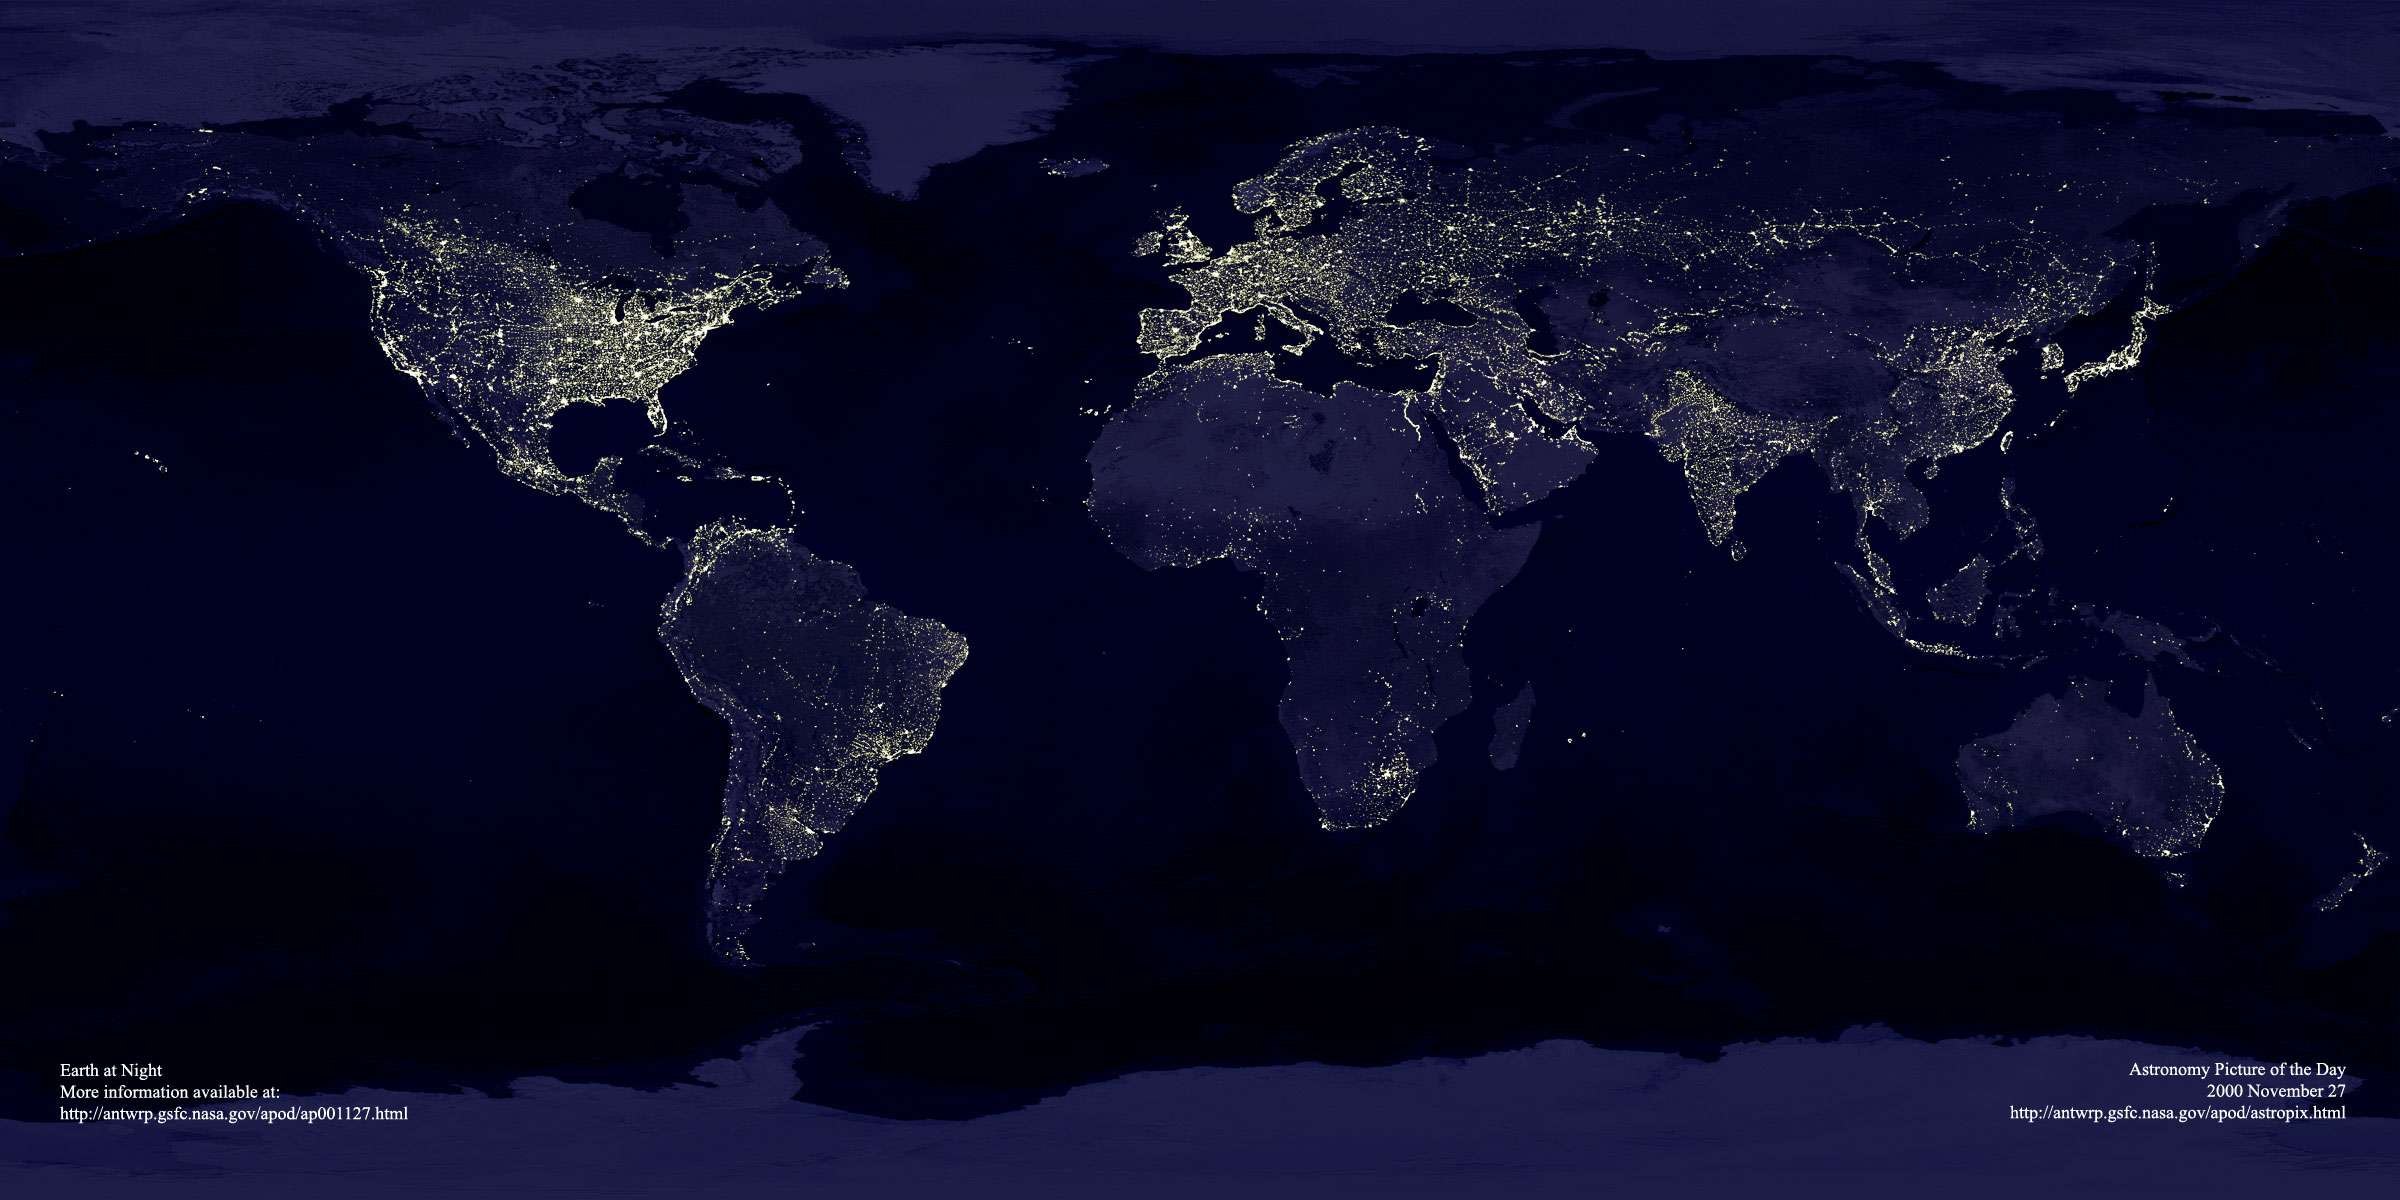 Inquinamento luminoso; Light pollution: 183 KB; click on the image to enlarge